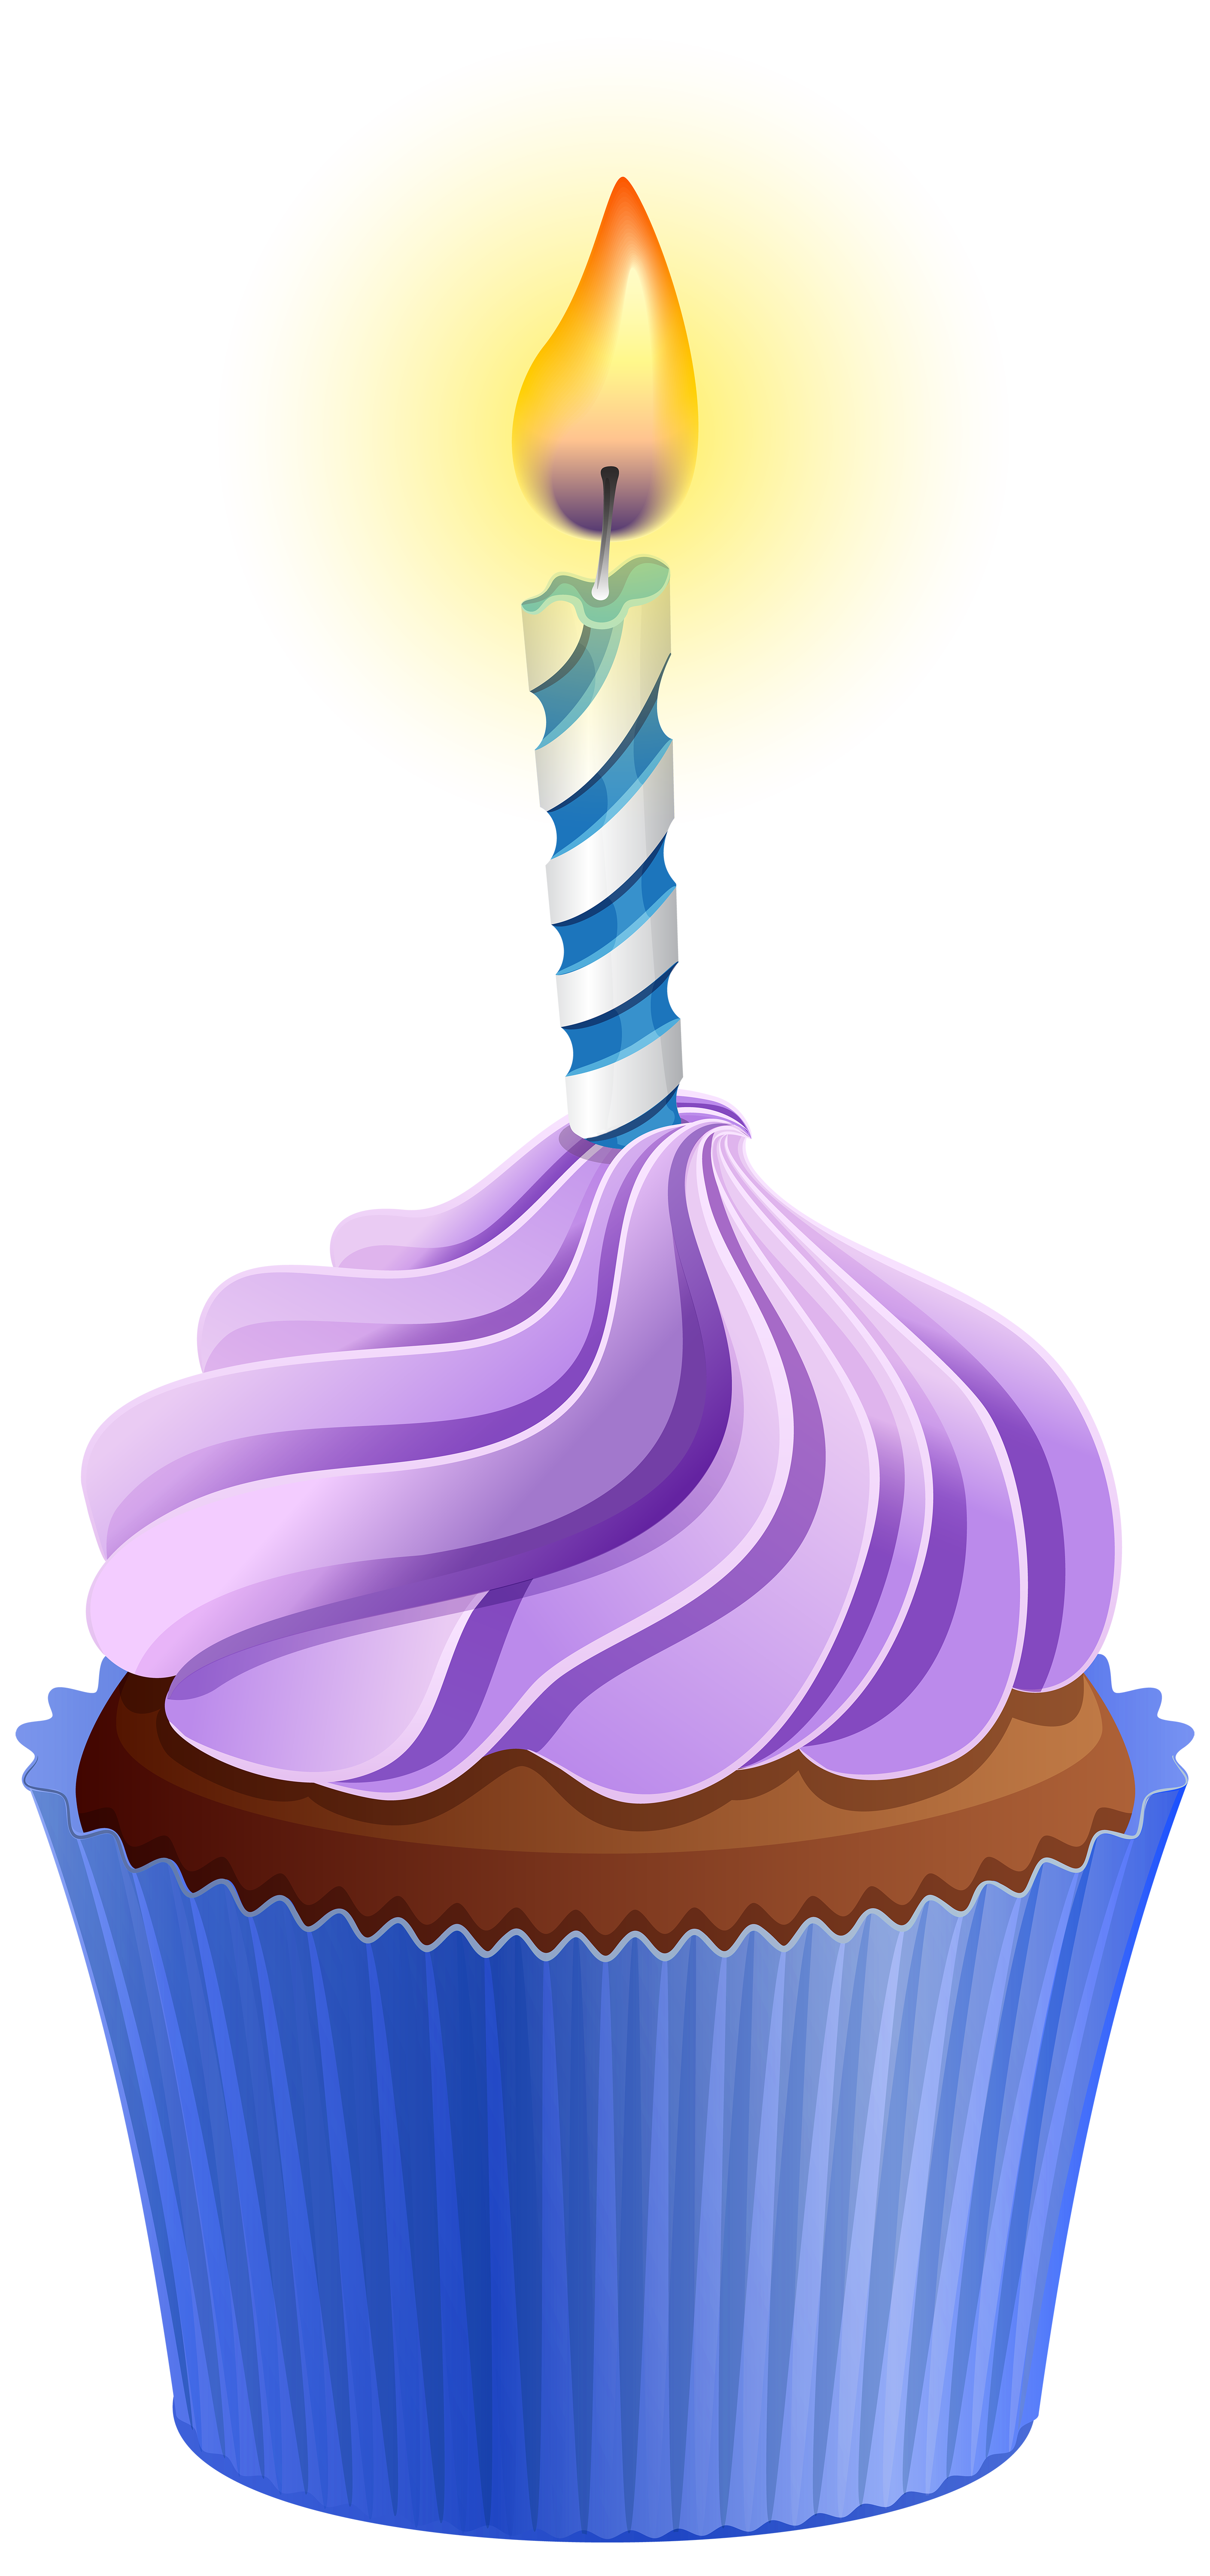 Birthday Cupcake with Candle PNG Clip Art Image | Gallery 